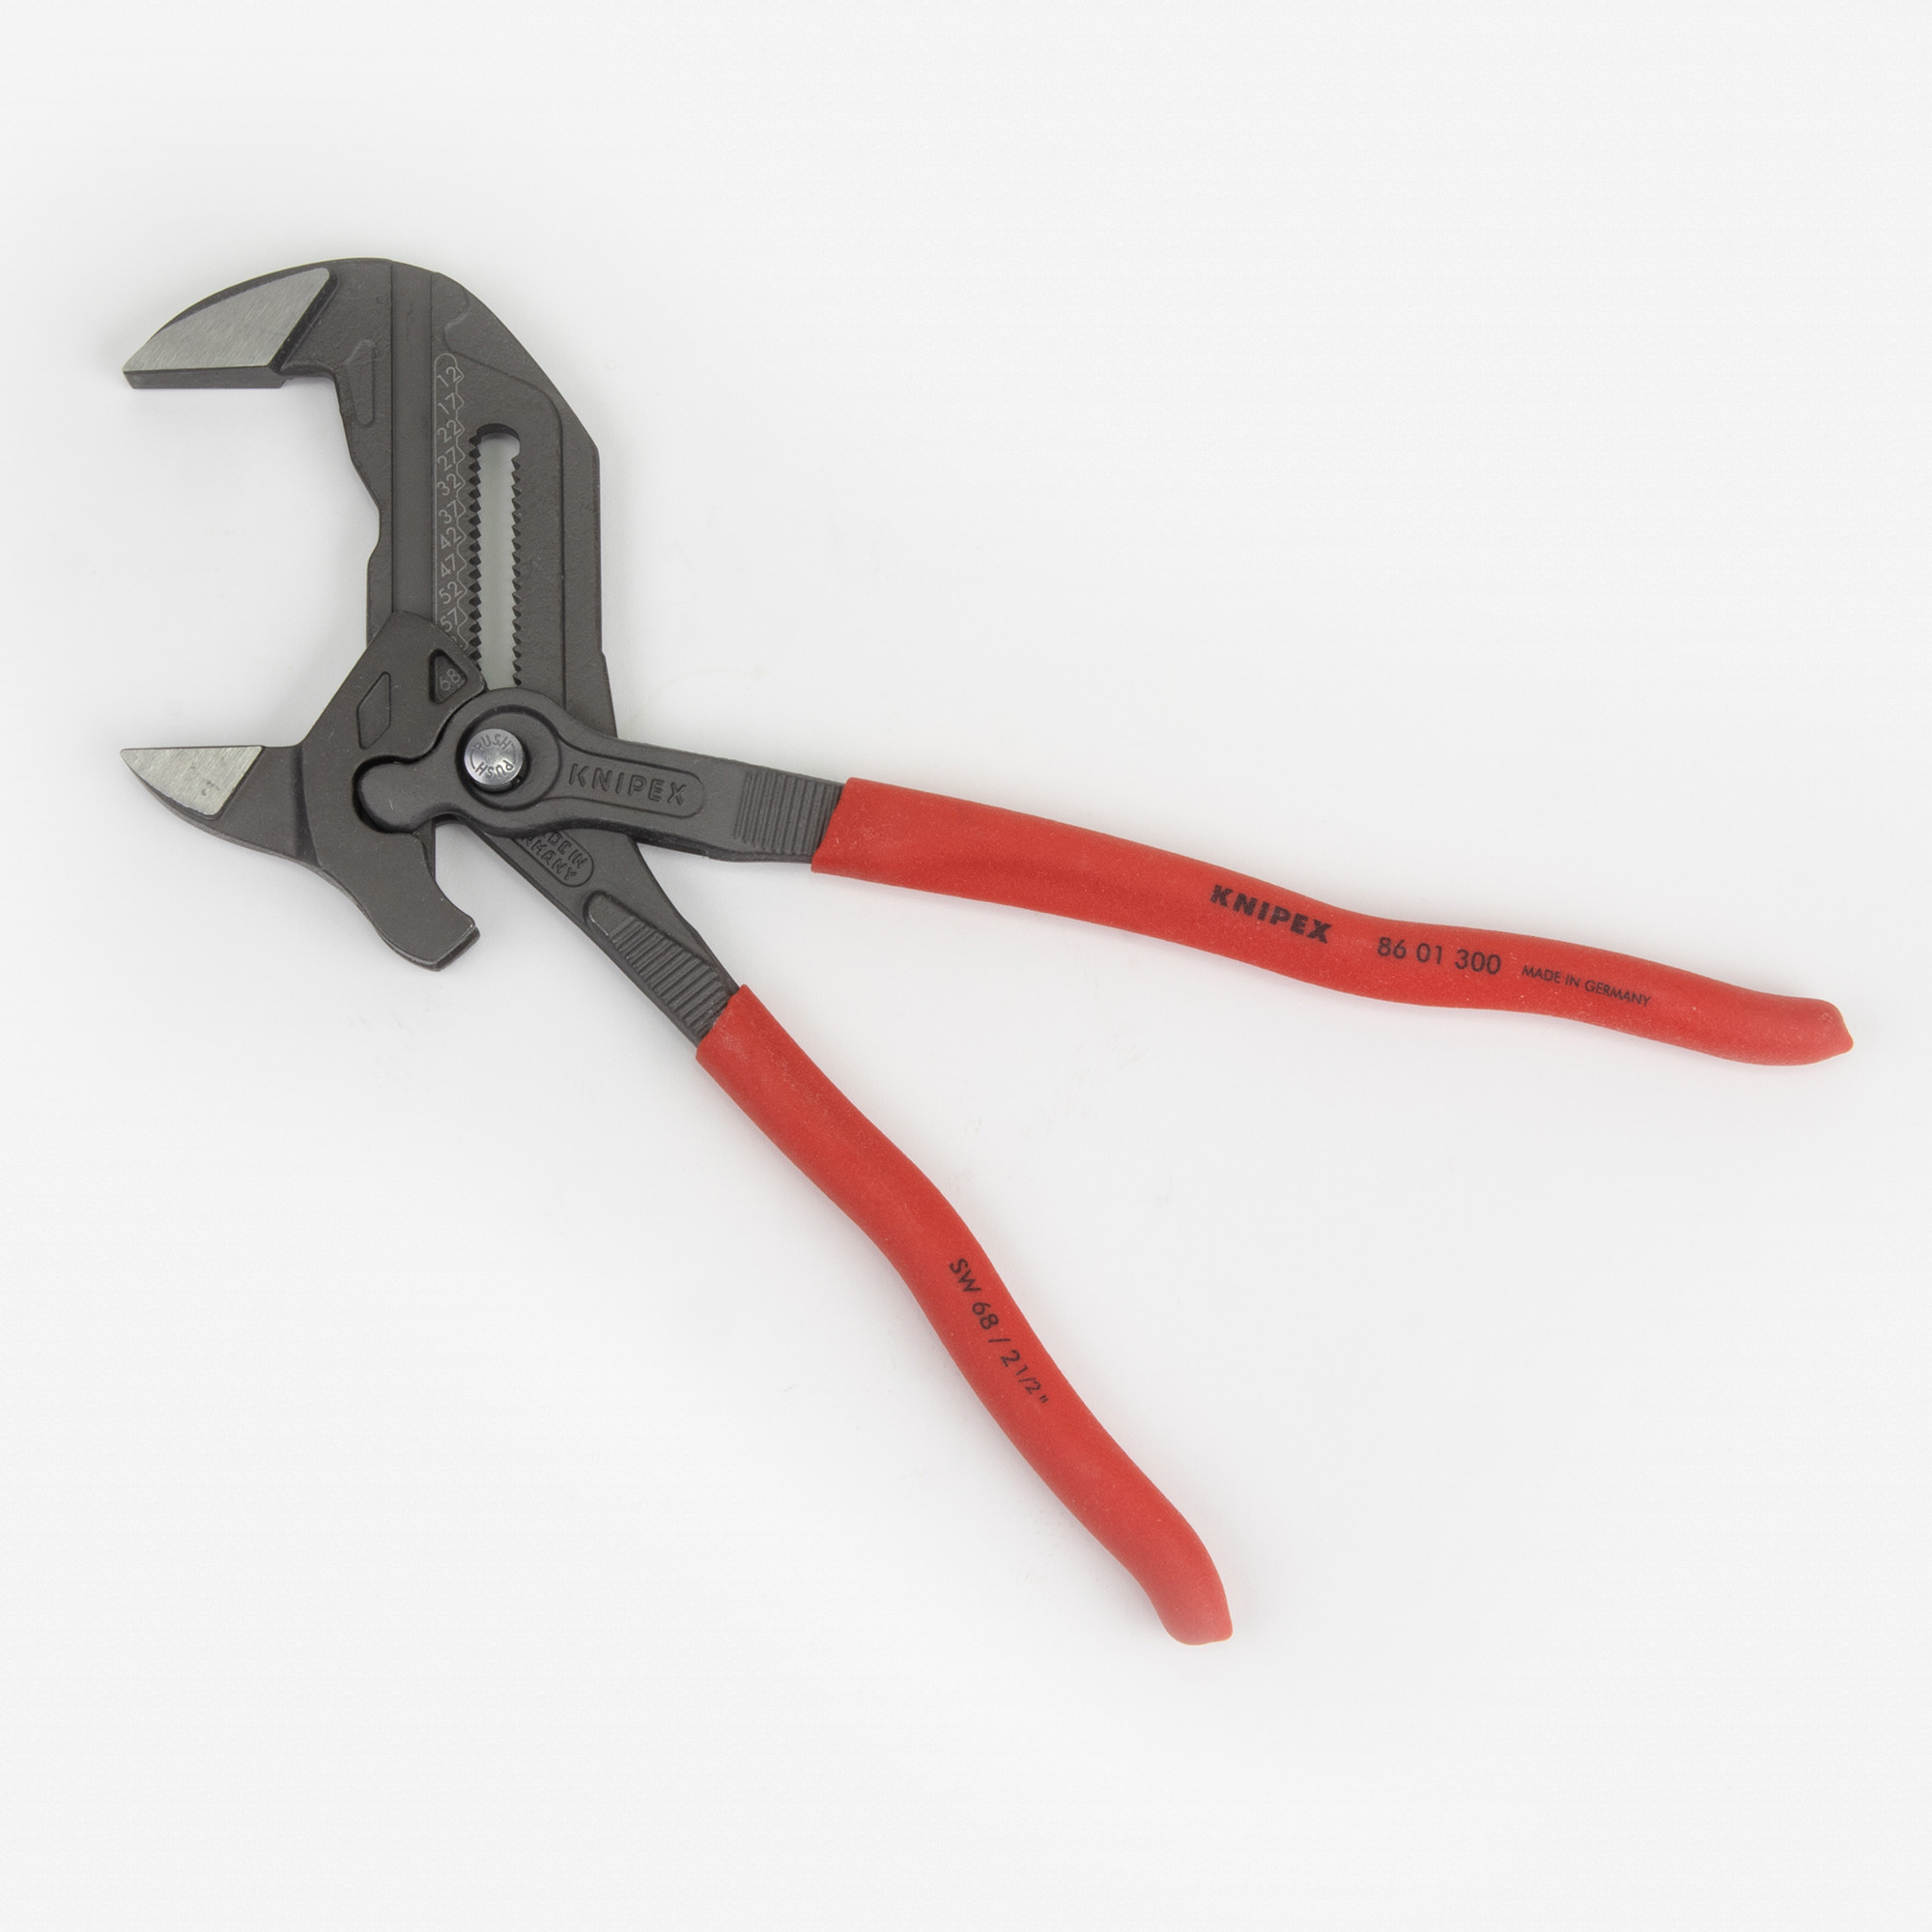 Knipex (86 01 300) Pliers Wrench, Black Finish – Steadfast Supply Co.